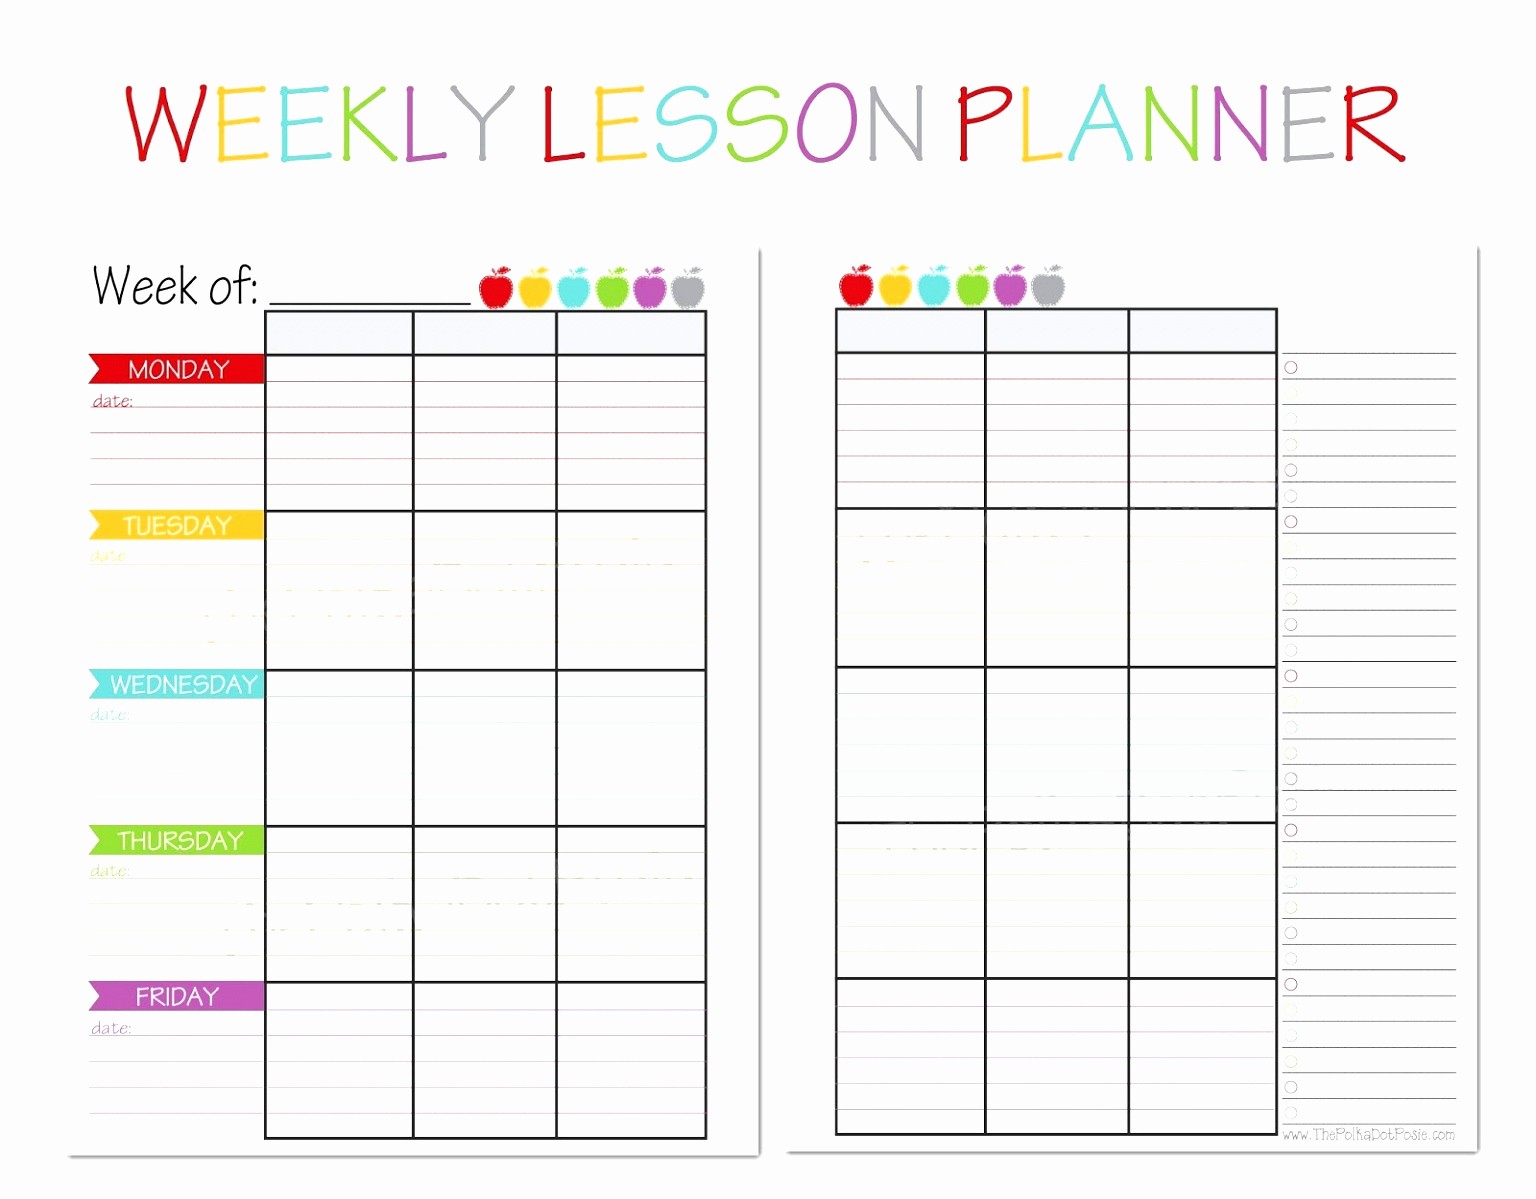 Free Weekly Lesson Plan Template Awesome 10 Weekly Lesson Plan Templates for Elementary Teachers